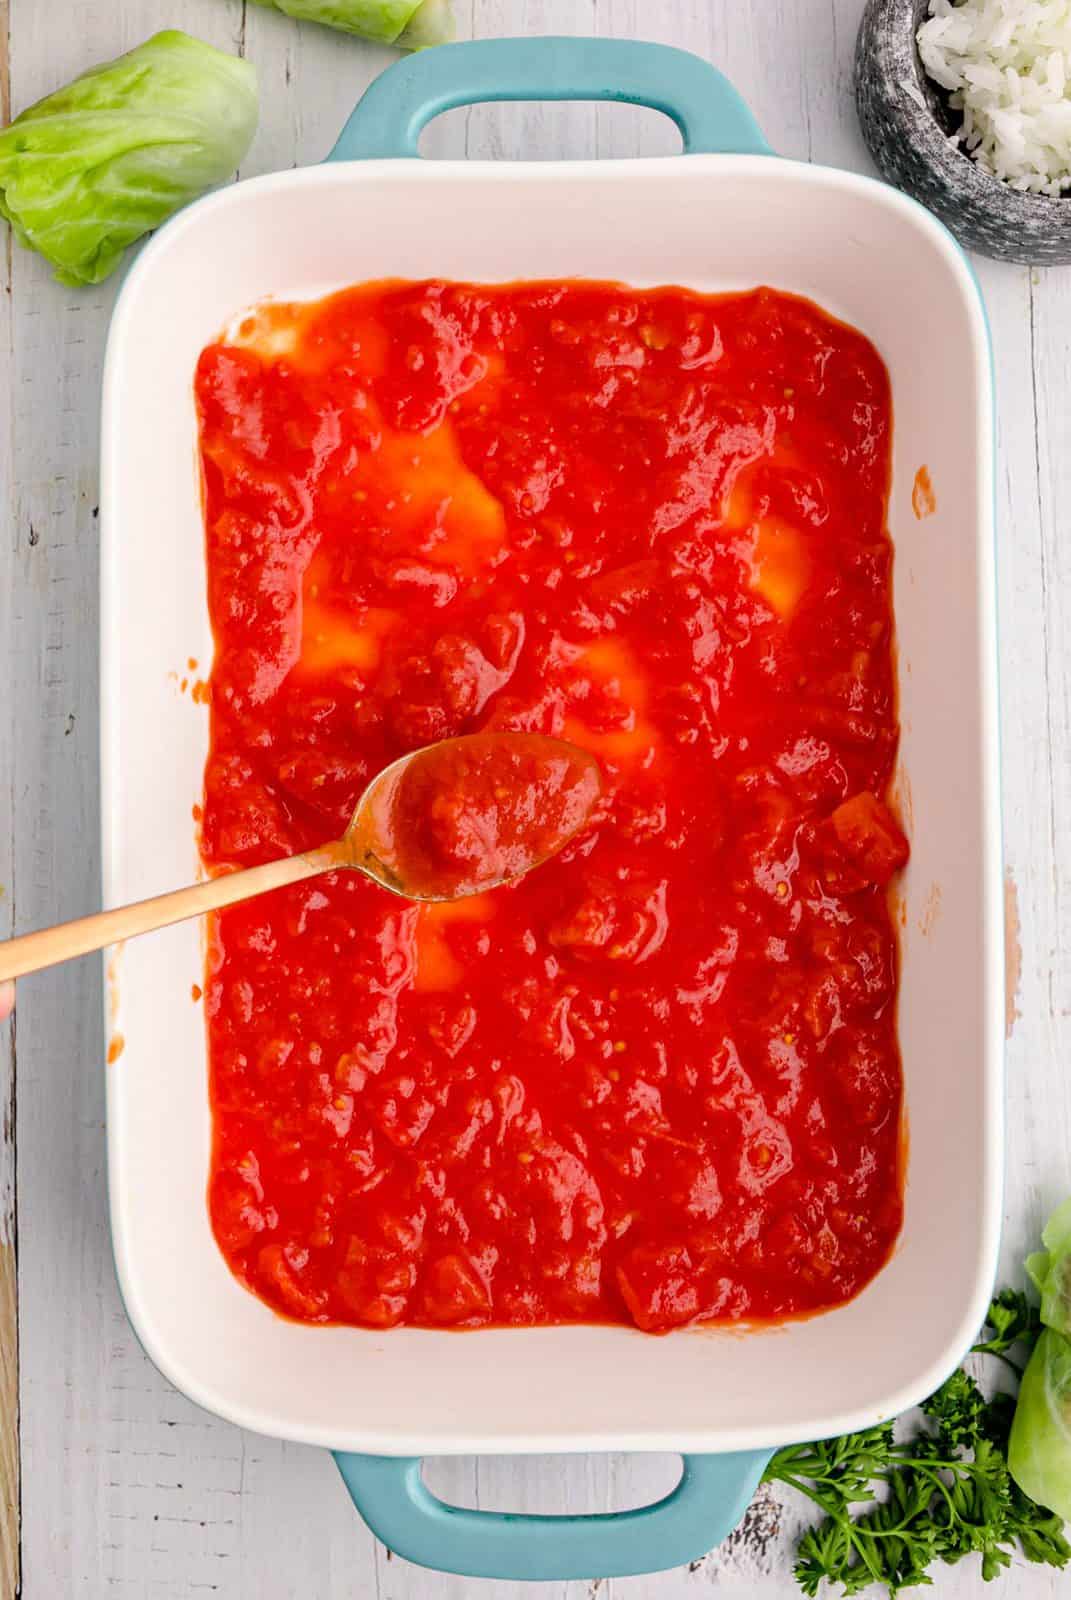 Sauce spread over bottom of baking dish.